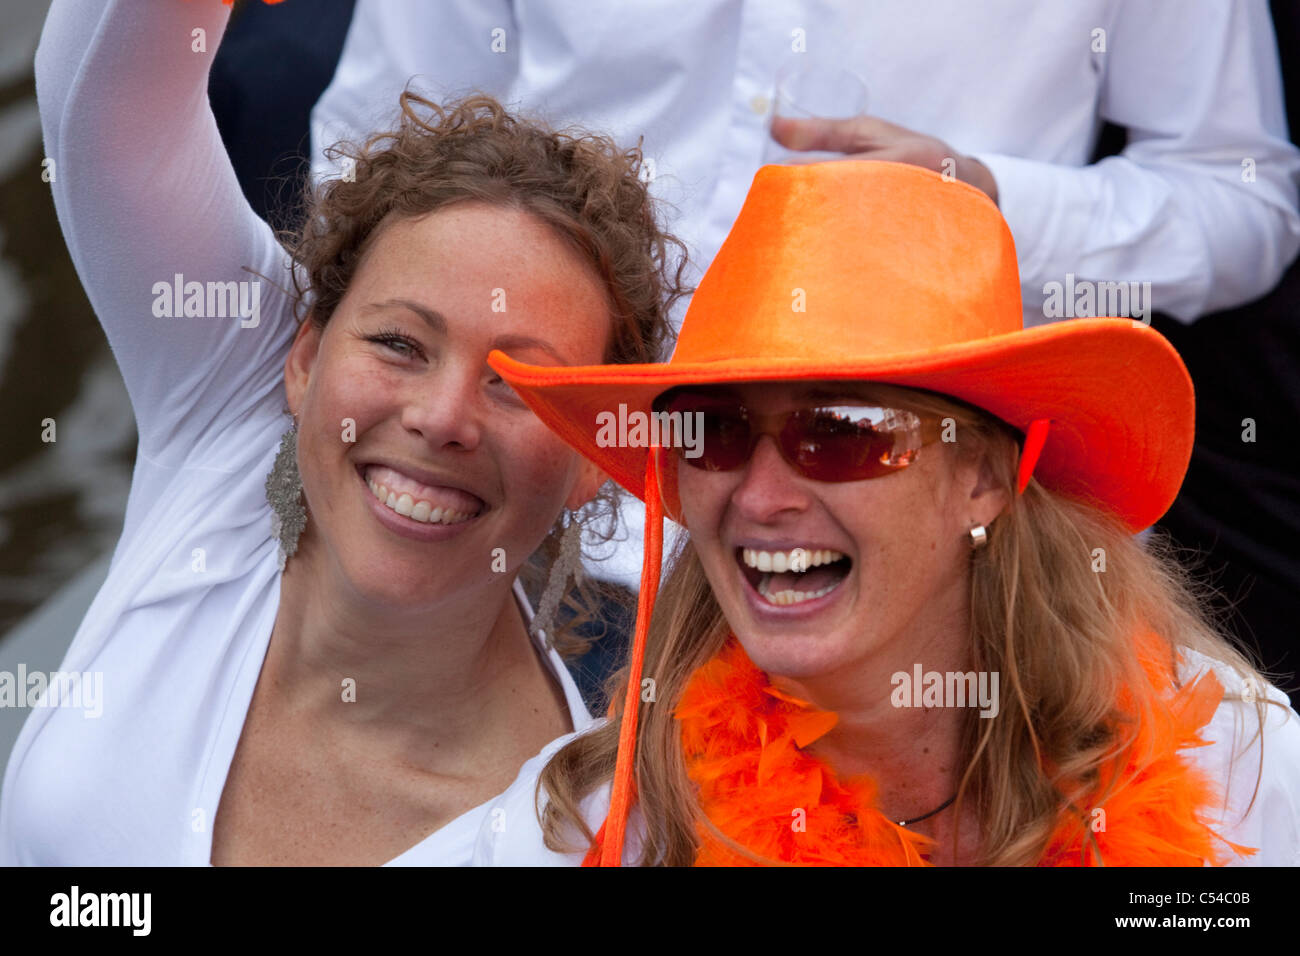 The Netherlands, Amsterdam. Queens Day is a unique night and day carnival like event on 30th of April each year. Stock Photo